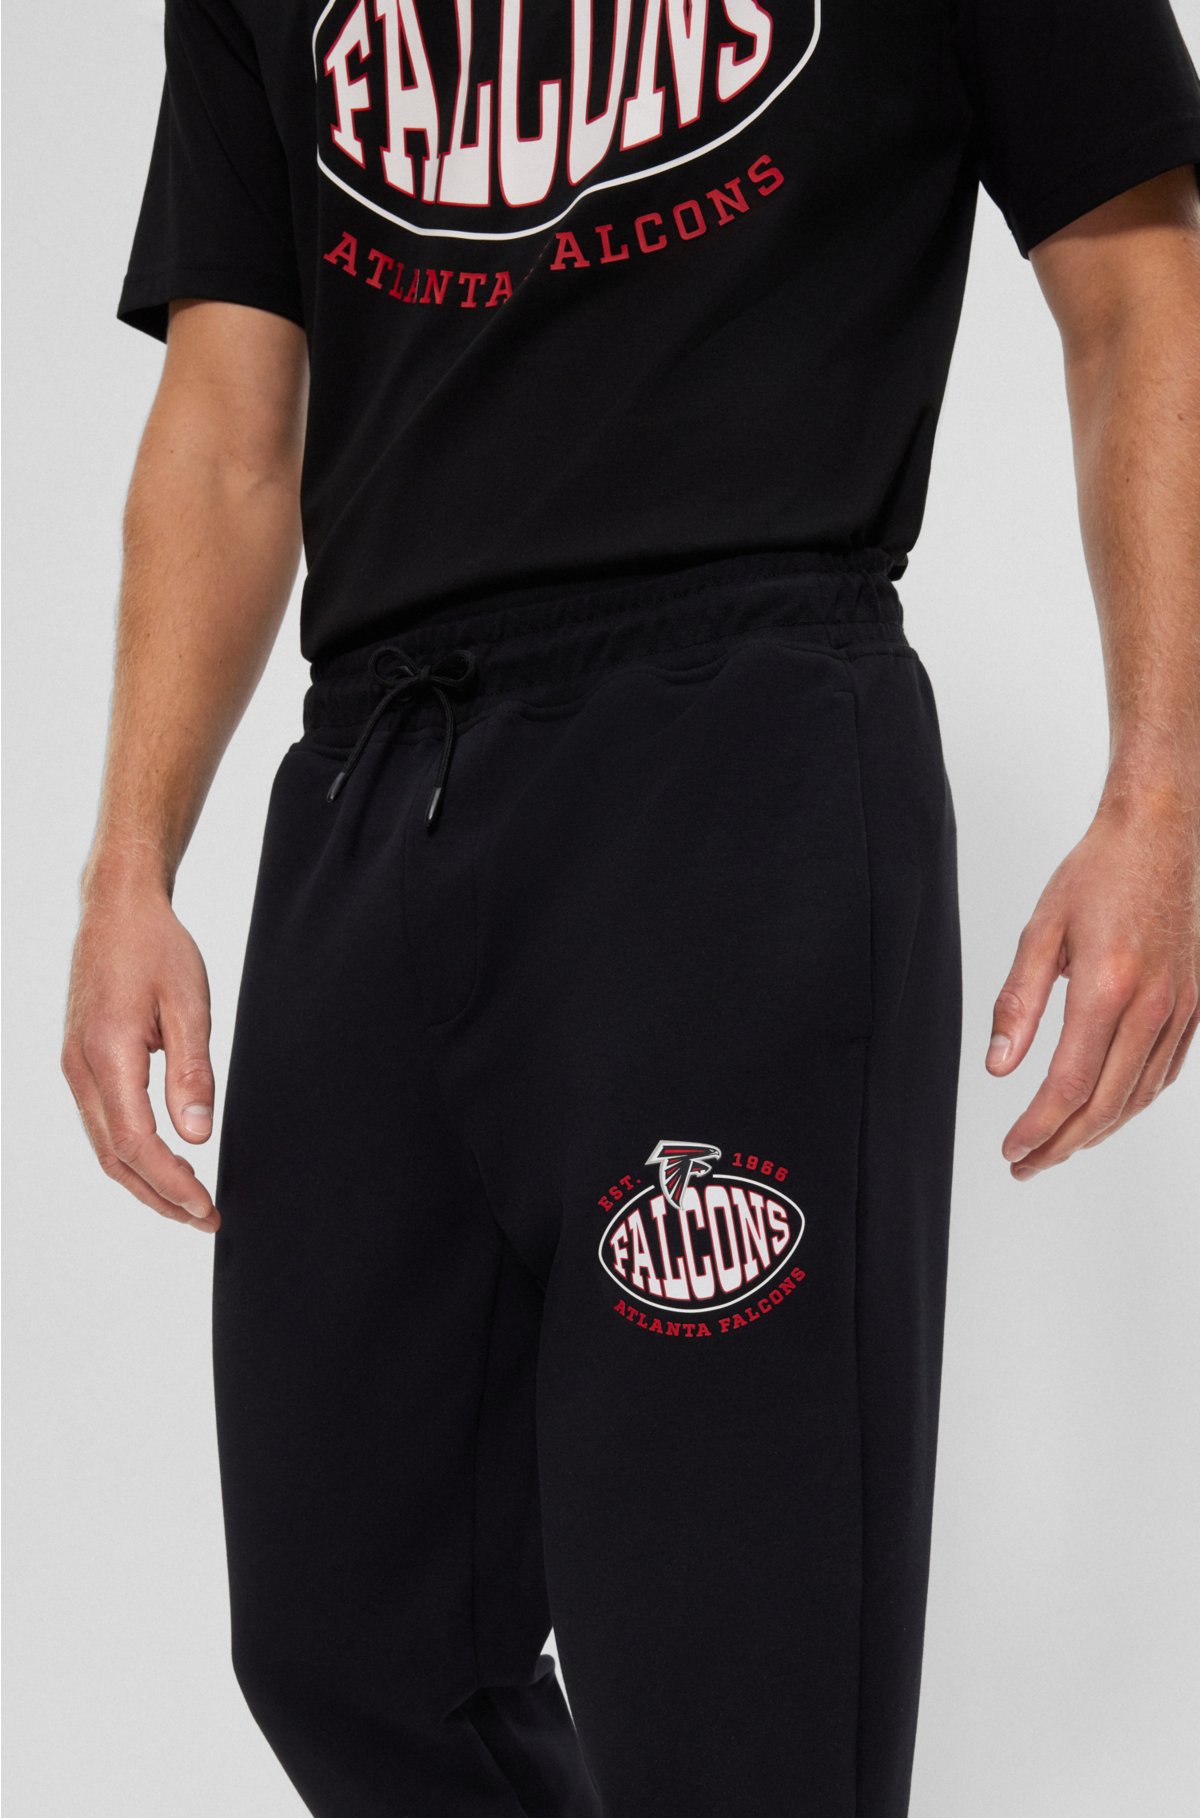 BOSS x NFL cotton-blend tracksuit bottoms with collaborative branding, Falcons